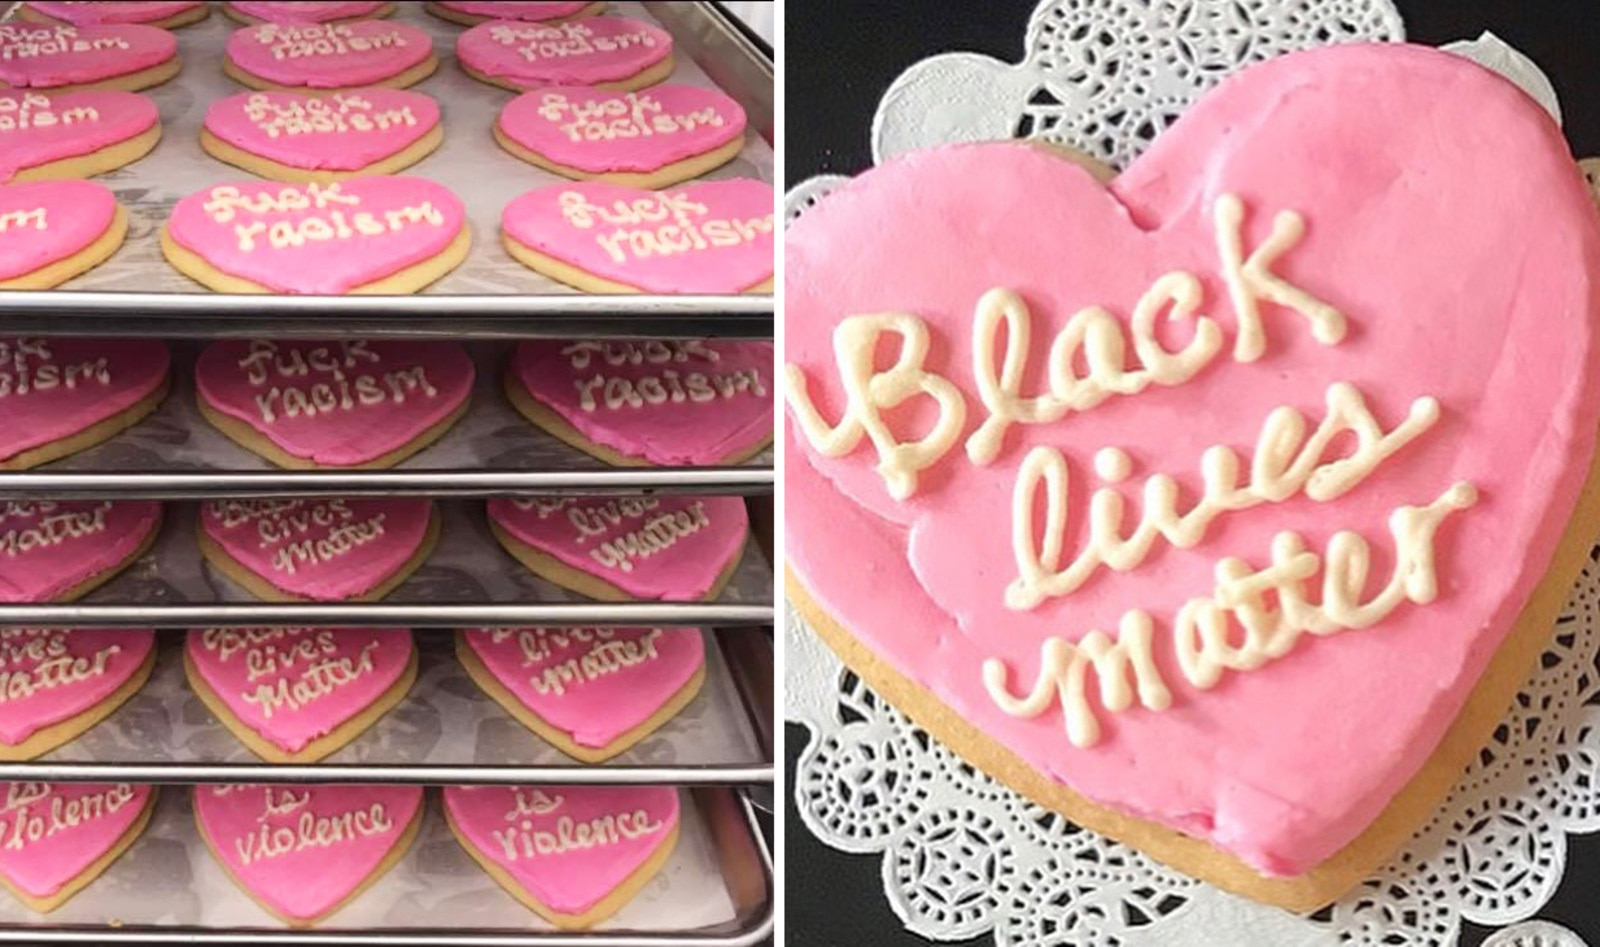 Chicago Vegan Bakery Raises Nearly $7,000 For Worldwide Bakers Against Racism Campaign